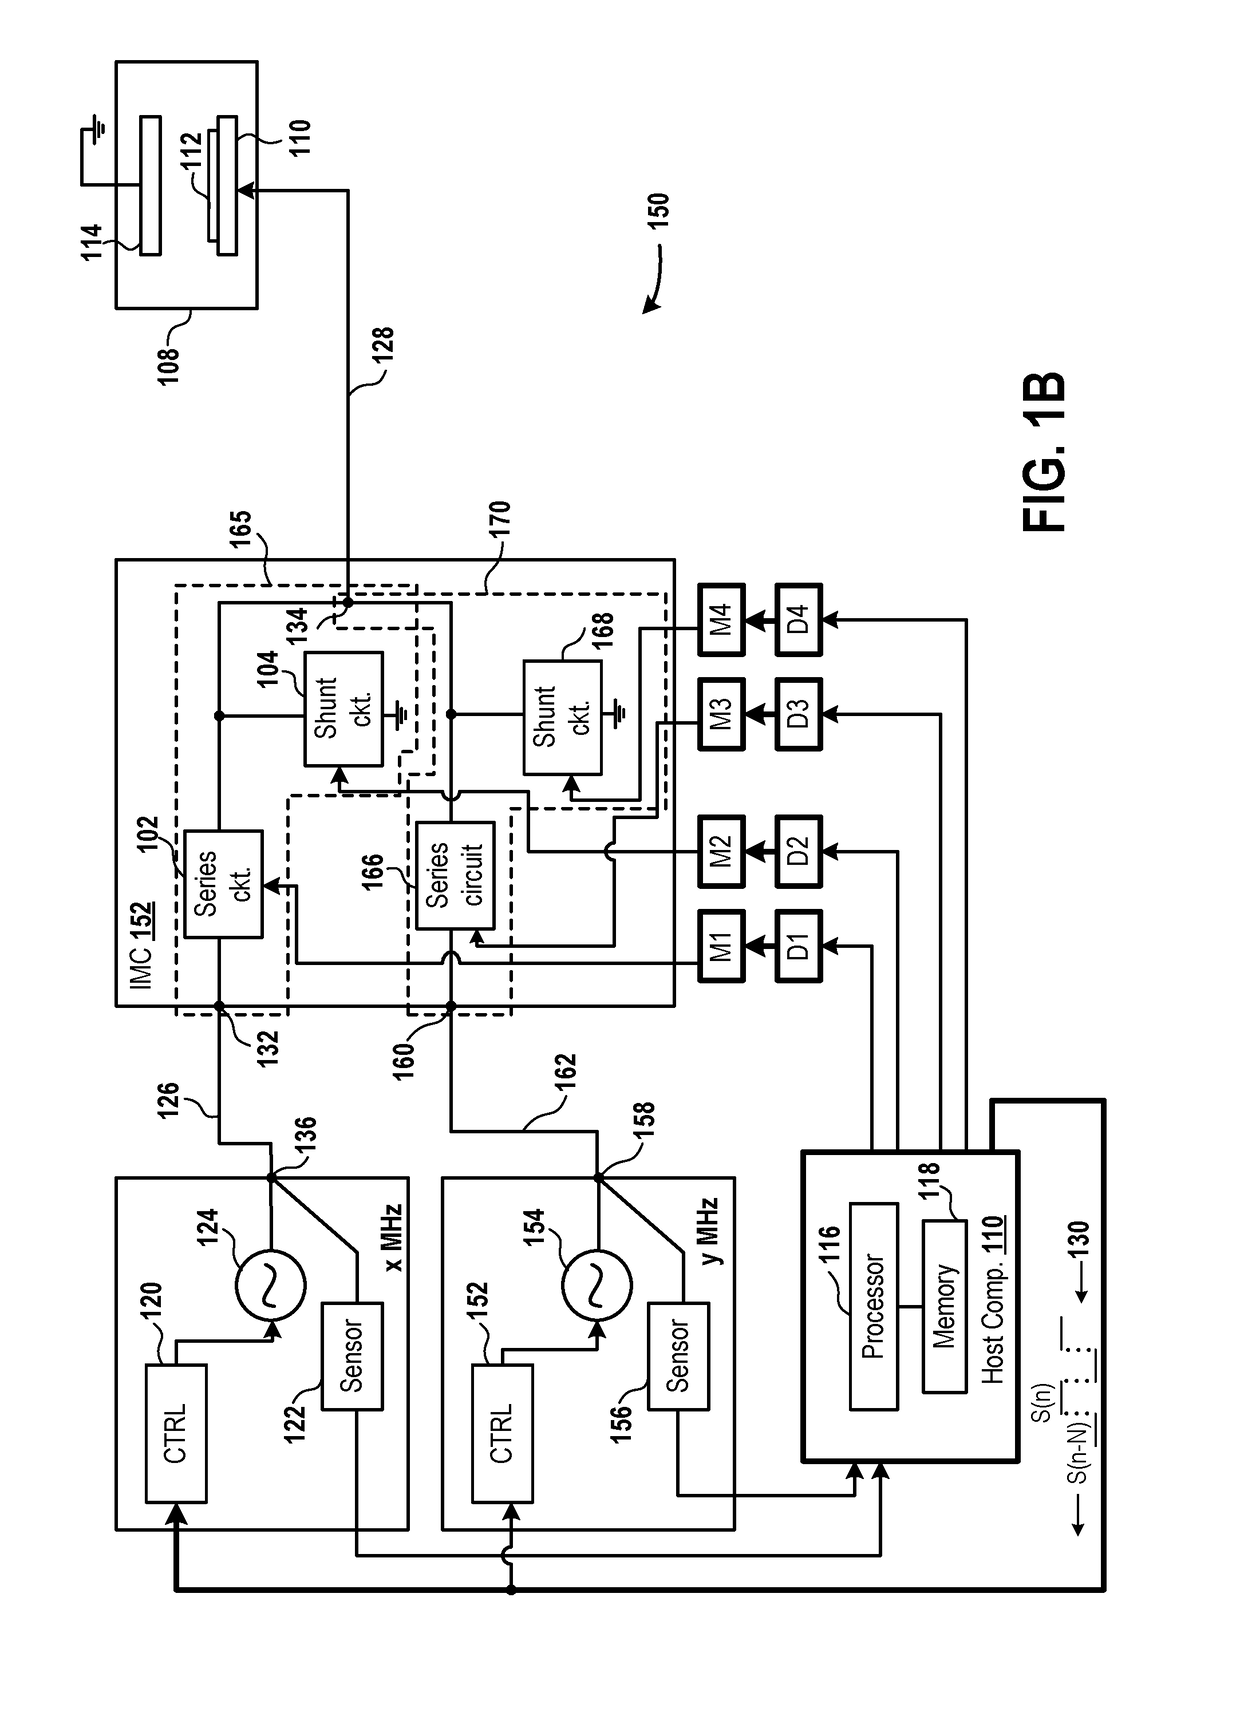 Systems and methods for tuning to reduce reflected power in multiple states